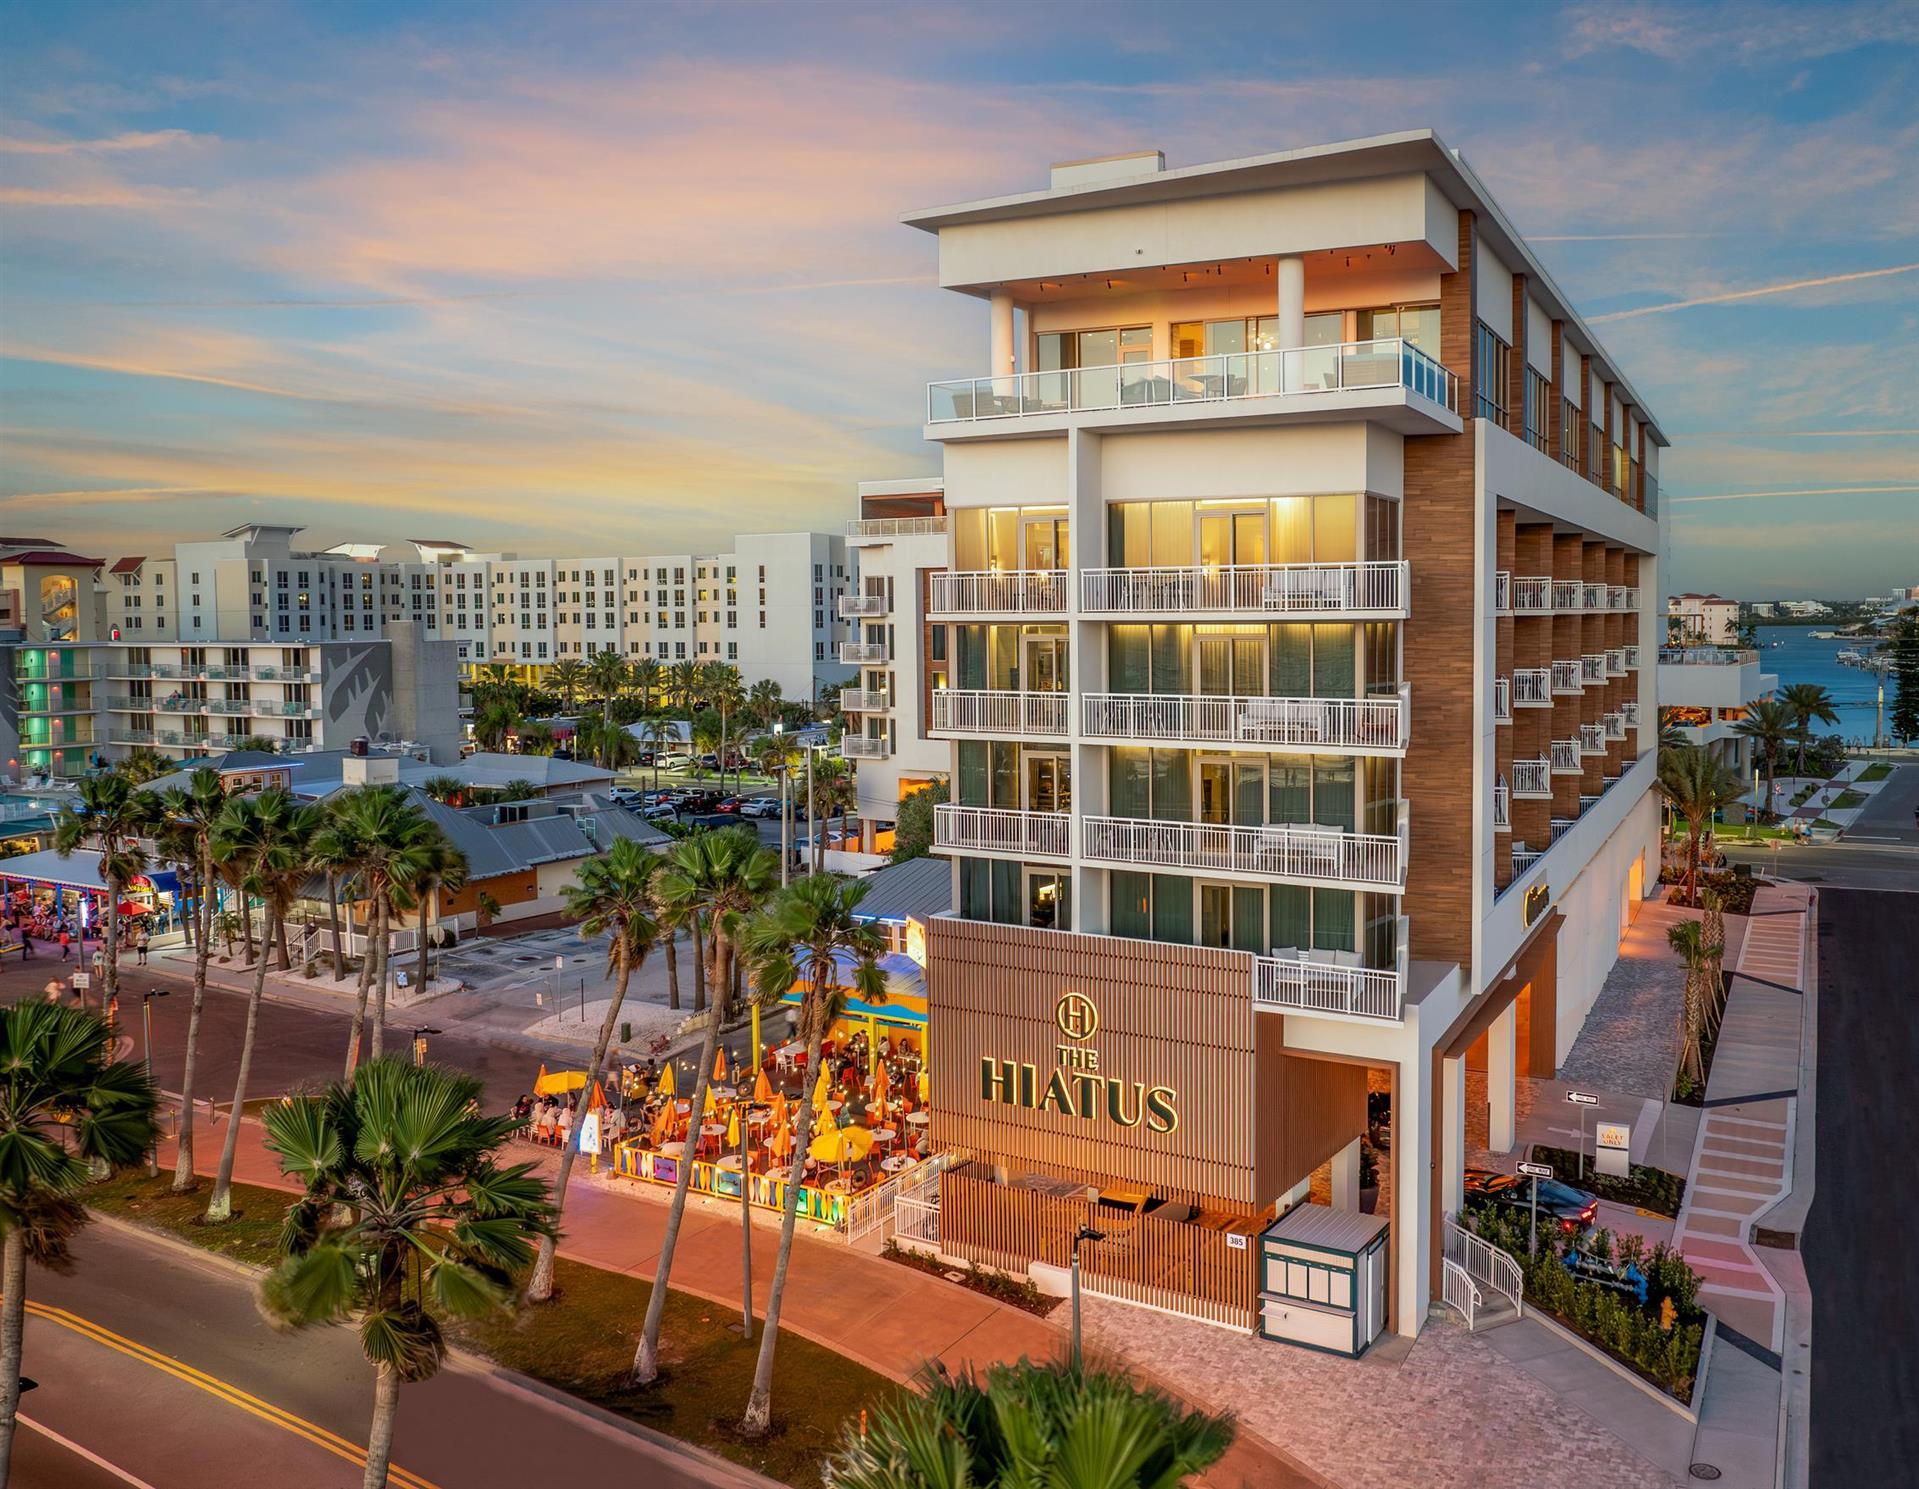 The Hiatus Clearwater Beach, Curio Collection by Hilton in Clearwater Beach, FL